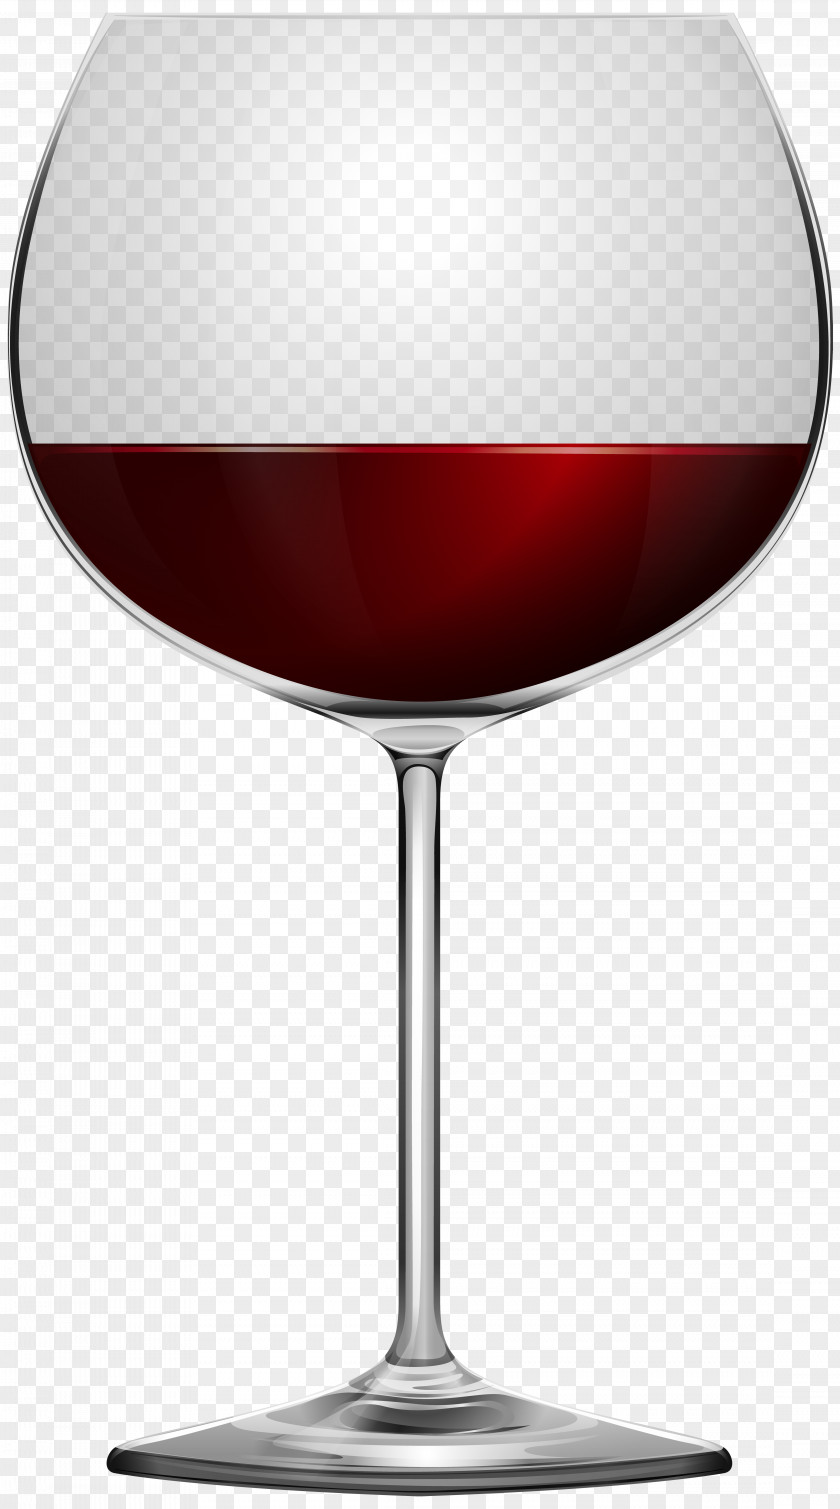 Red Wine Glass Transparent Image File Formats Lossless Compression PNG